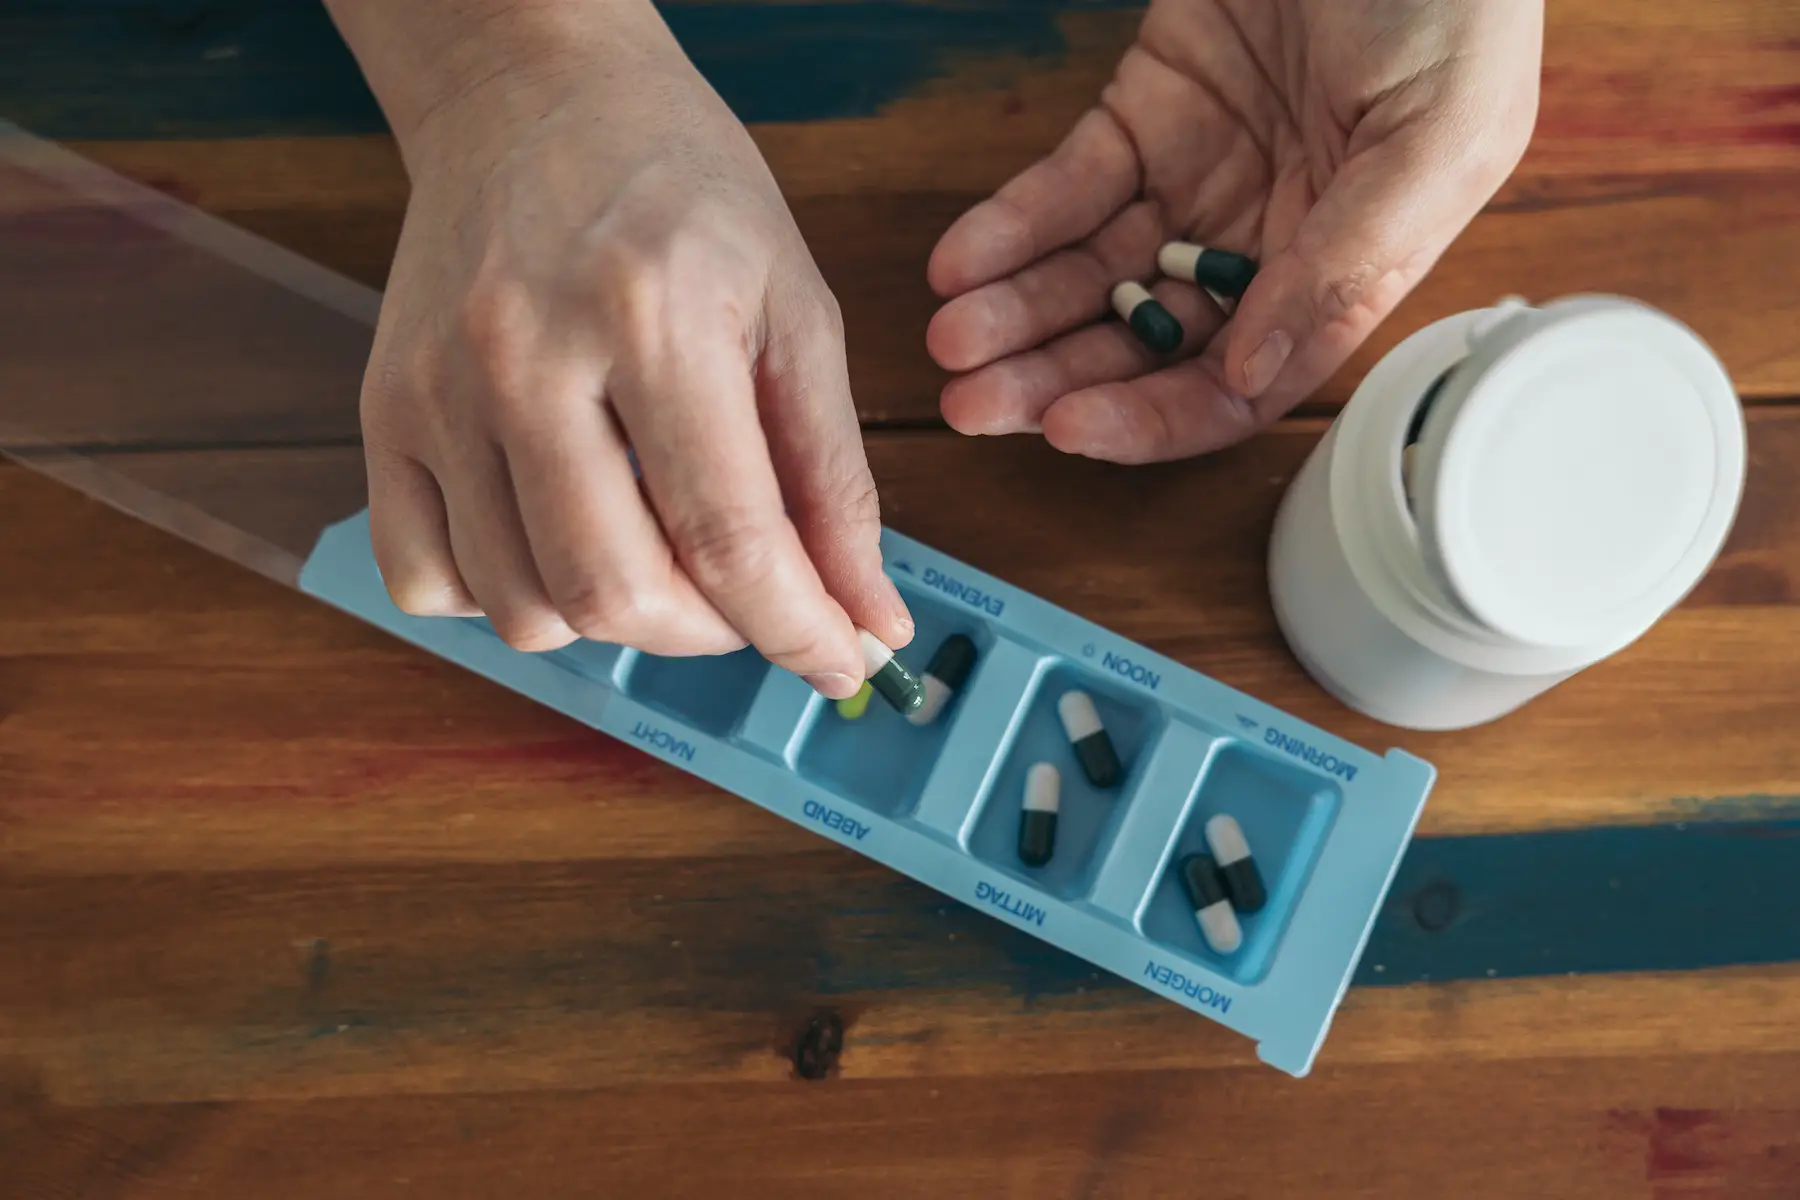 A person is putting their daily medication into a pill organizer, labeled with times of day in English and German